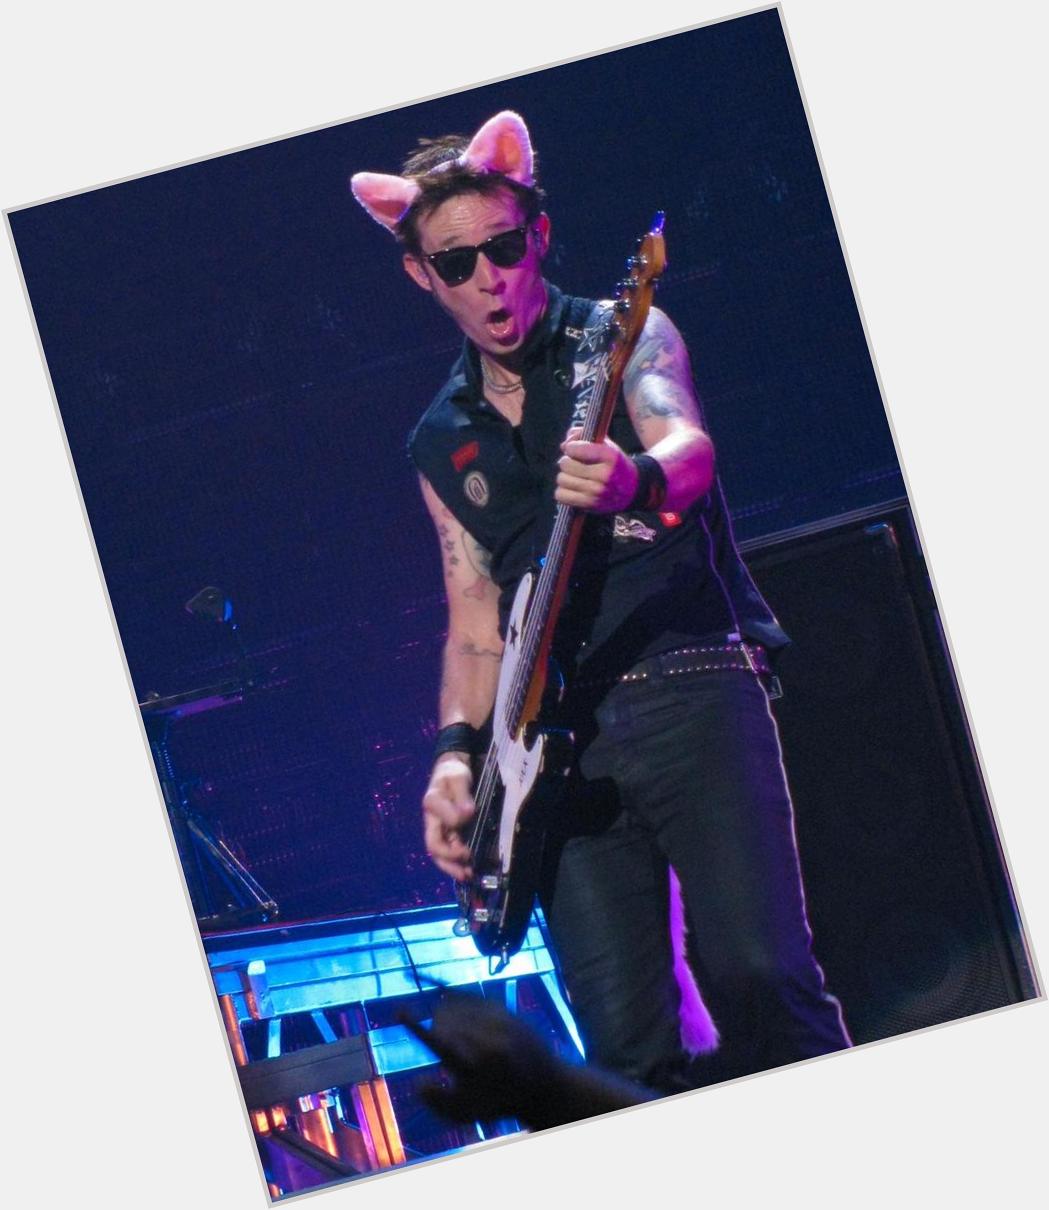 Happy 43th birthday Michael Ryan Pritchard, aka Mike Dirnt, best bassist in the world and great person 